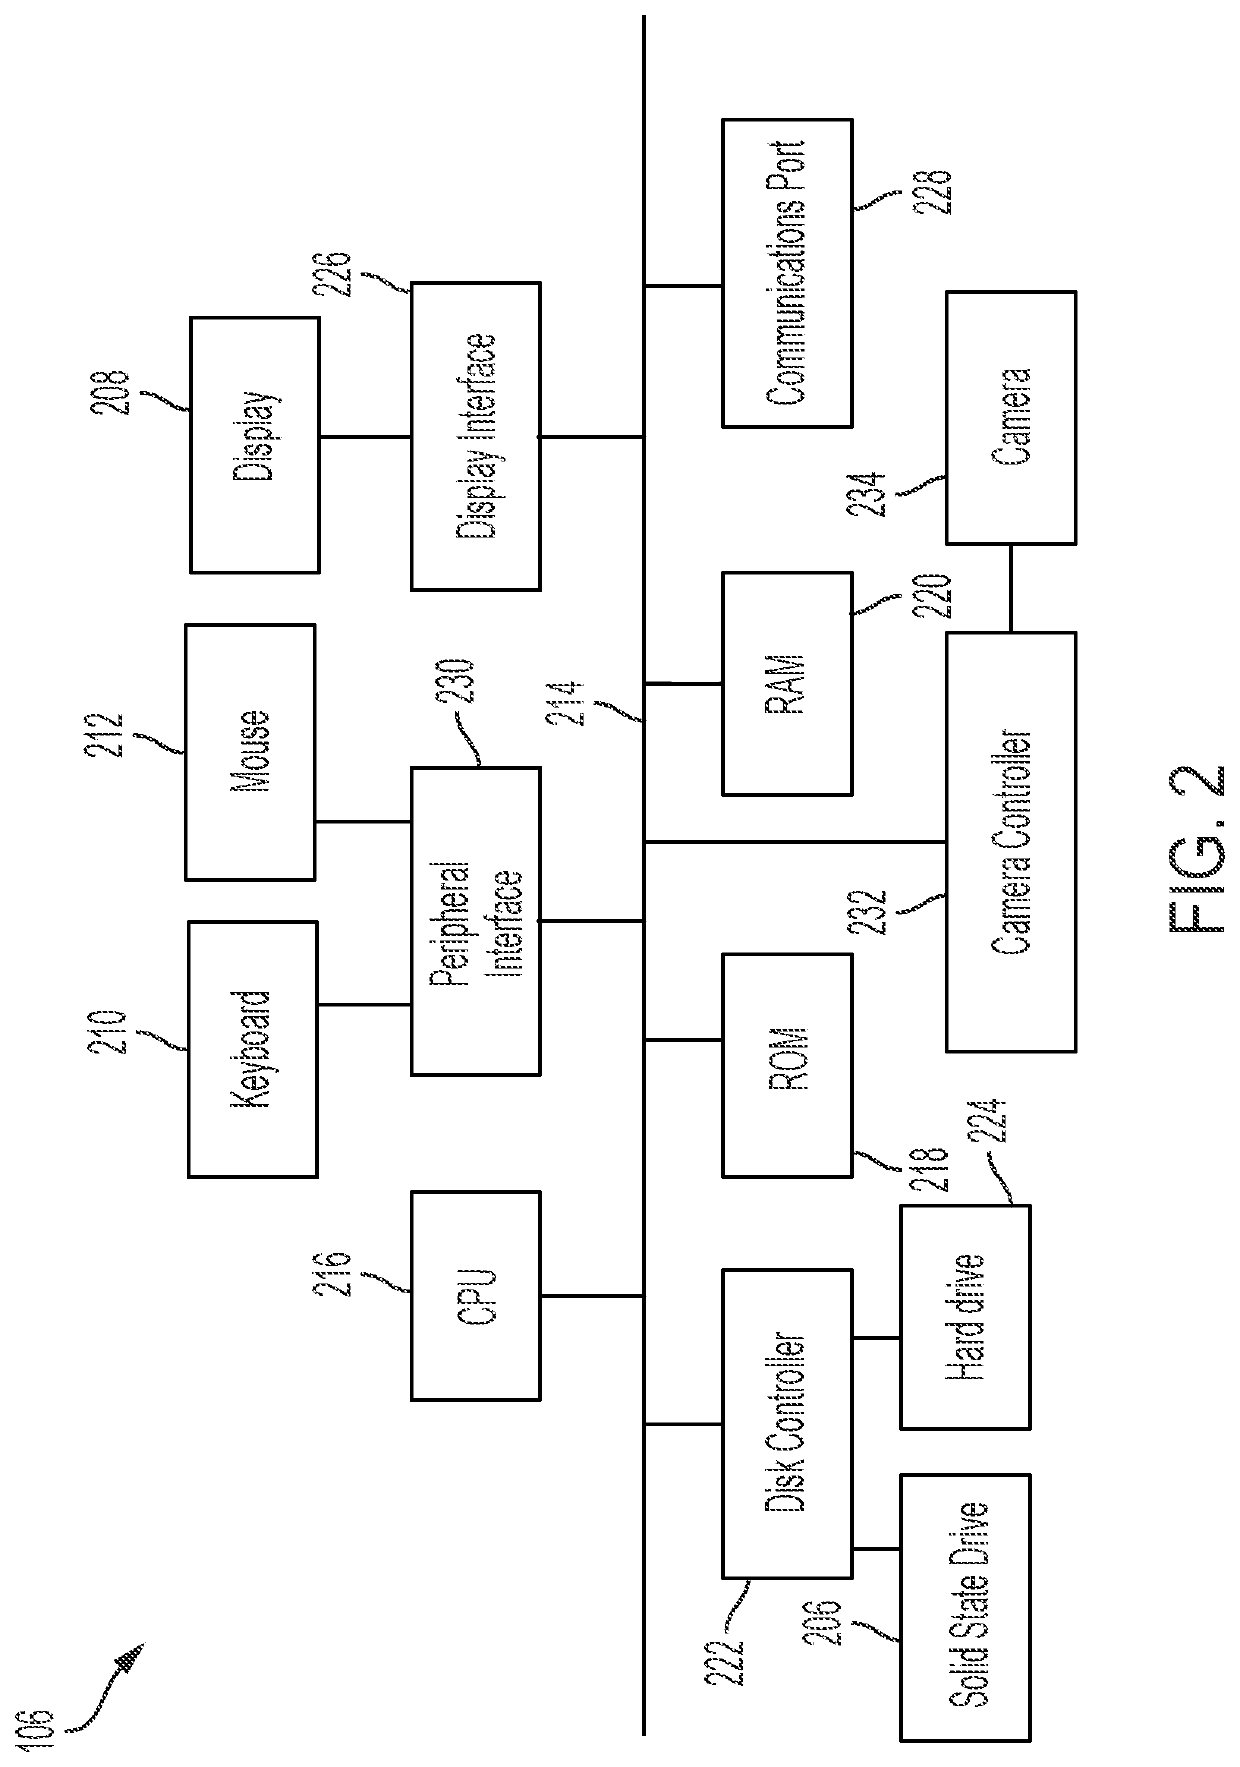 Systems and methods for storing, authenticating and transmitting digital health information and records